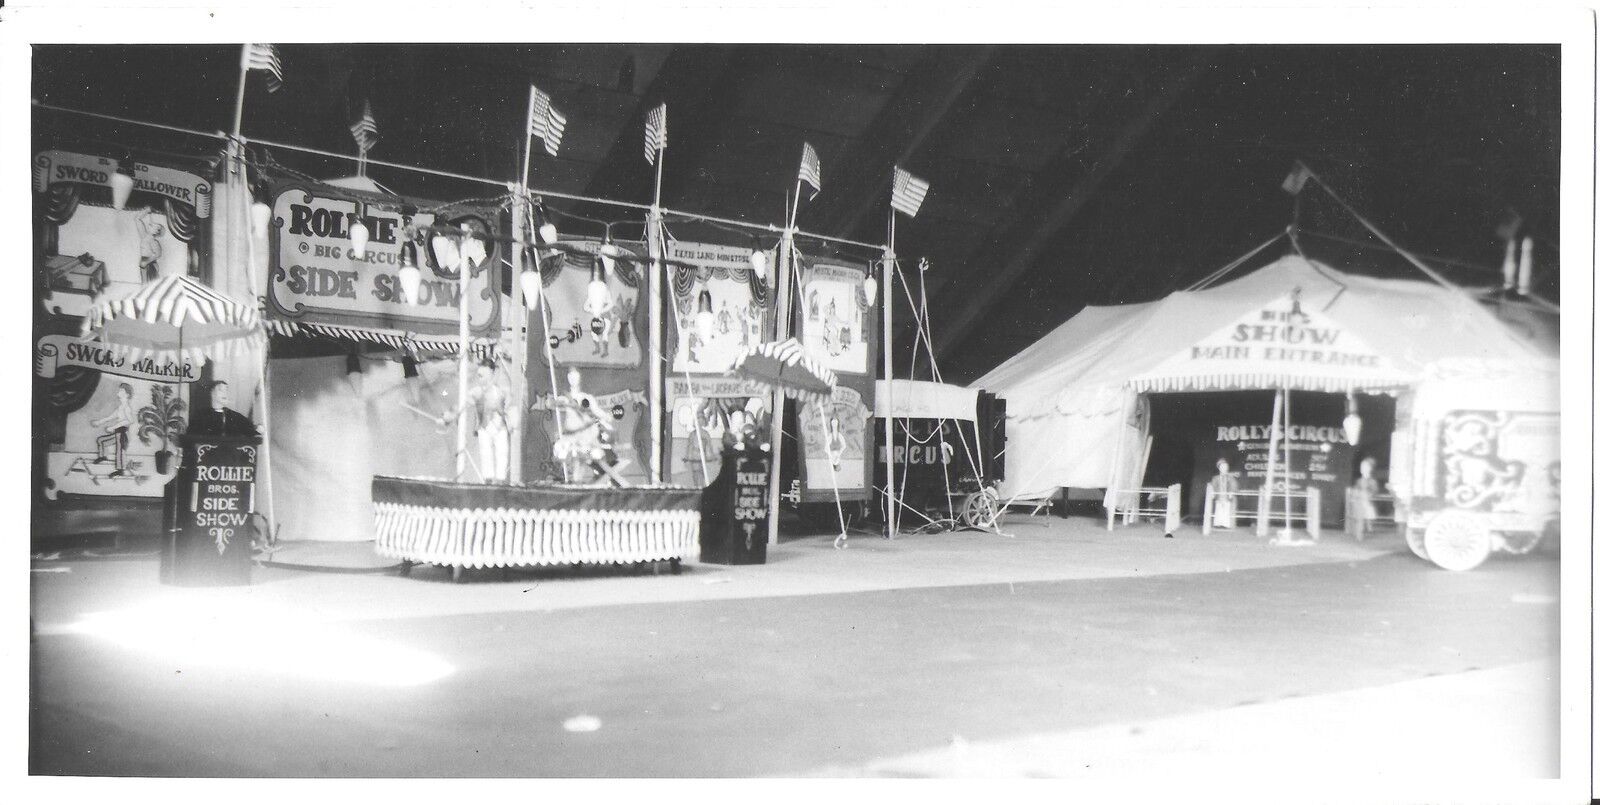 BW Photograph Showing the Model of a Midway at Rollie Brothers Circus c1940-50s